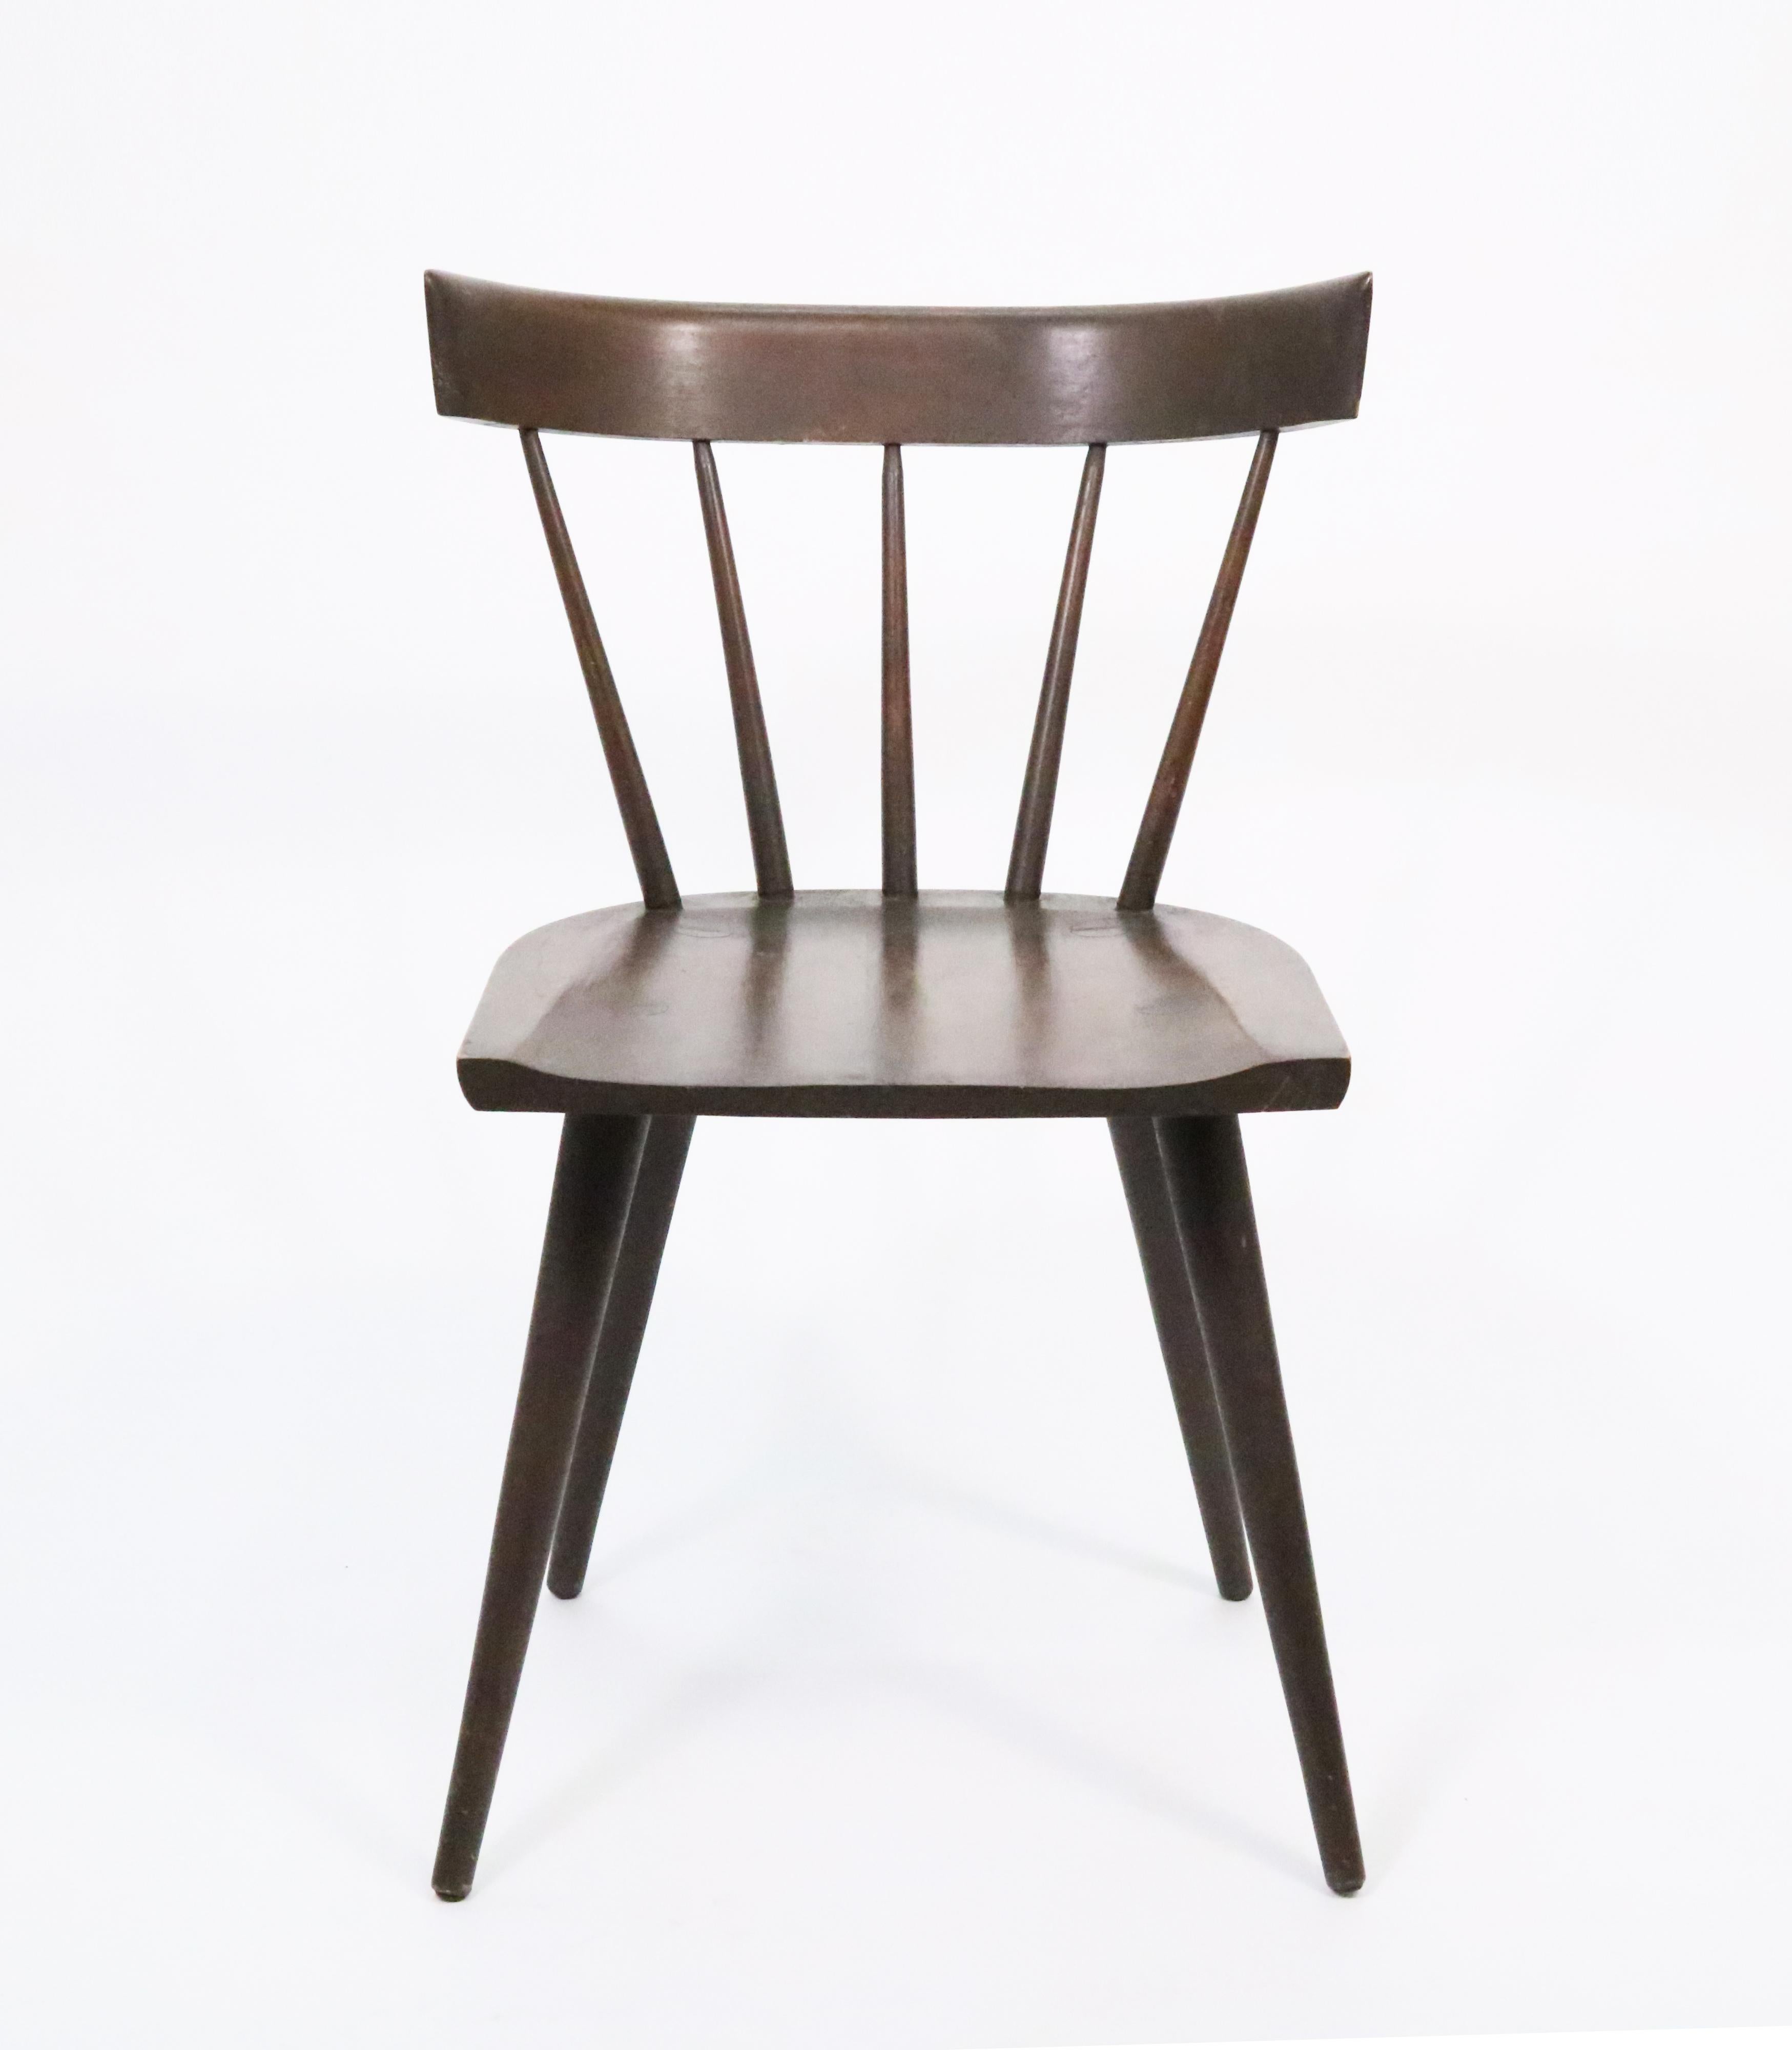 Mid-Century Modern 'Planner Group' side chair No. 1531 by Paul McCobb for Winchendon Furniture Co. 

Solid maple in original tobacco finish with a spindle supported backrest and signature joinery and inlay detail. 

Perfect for dining room or